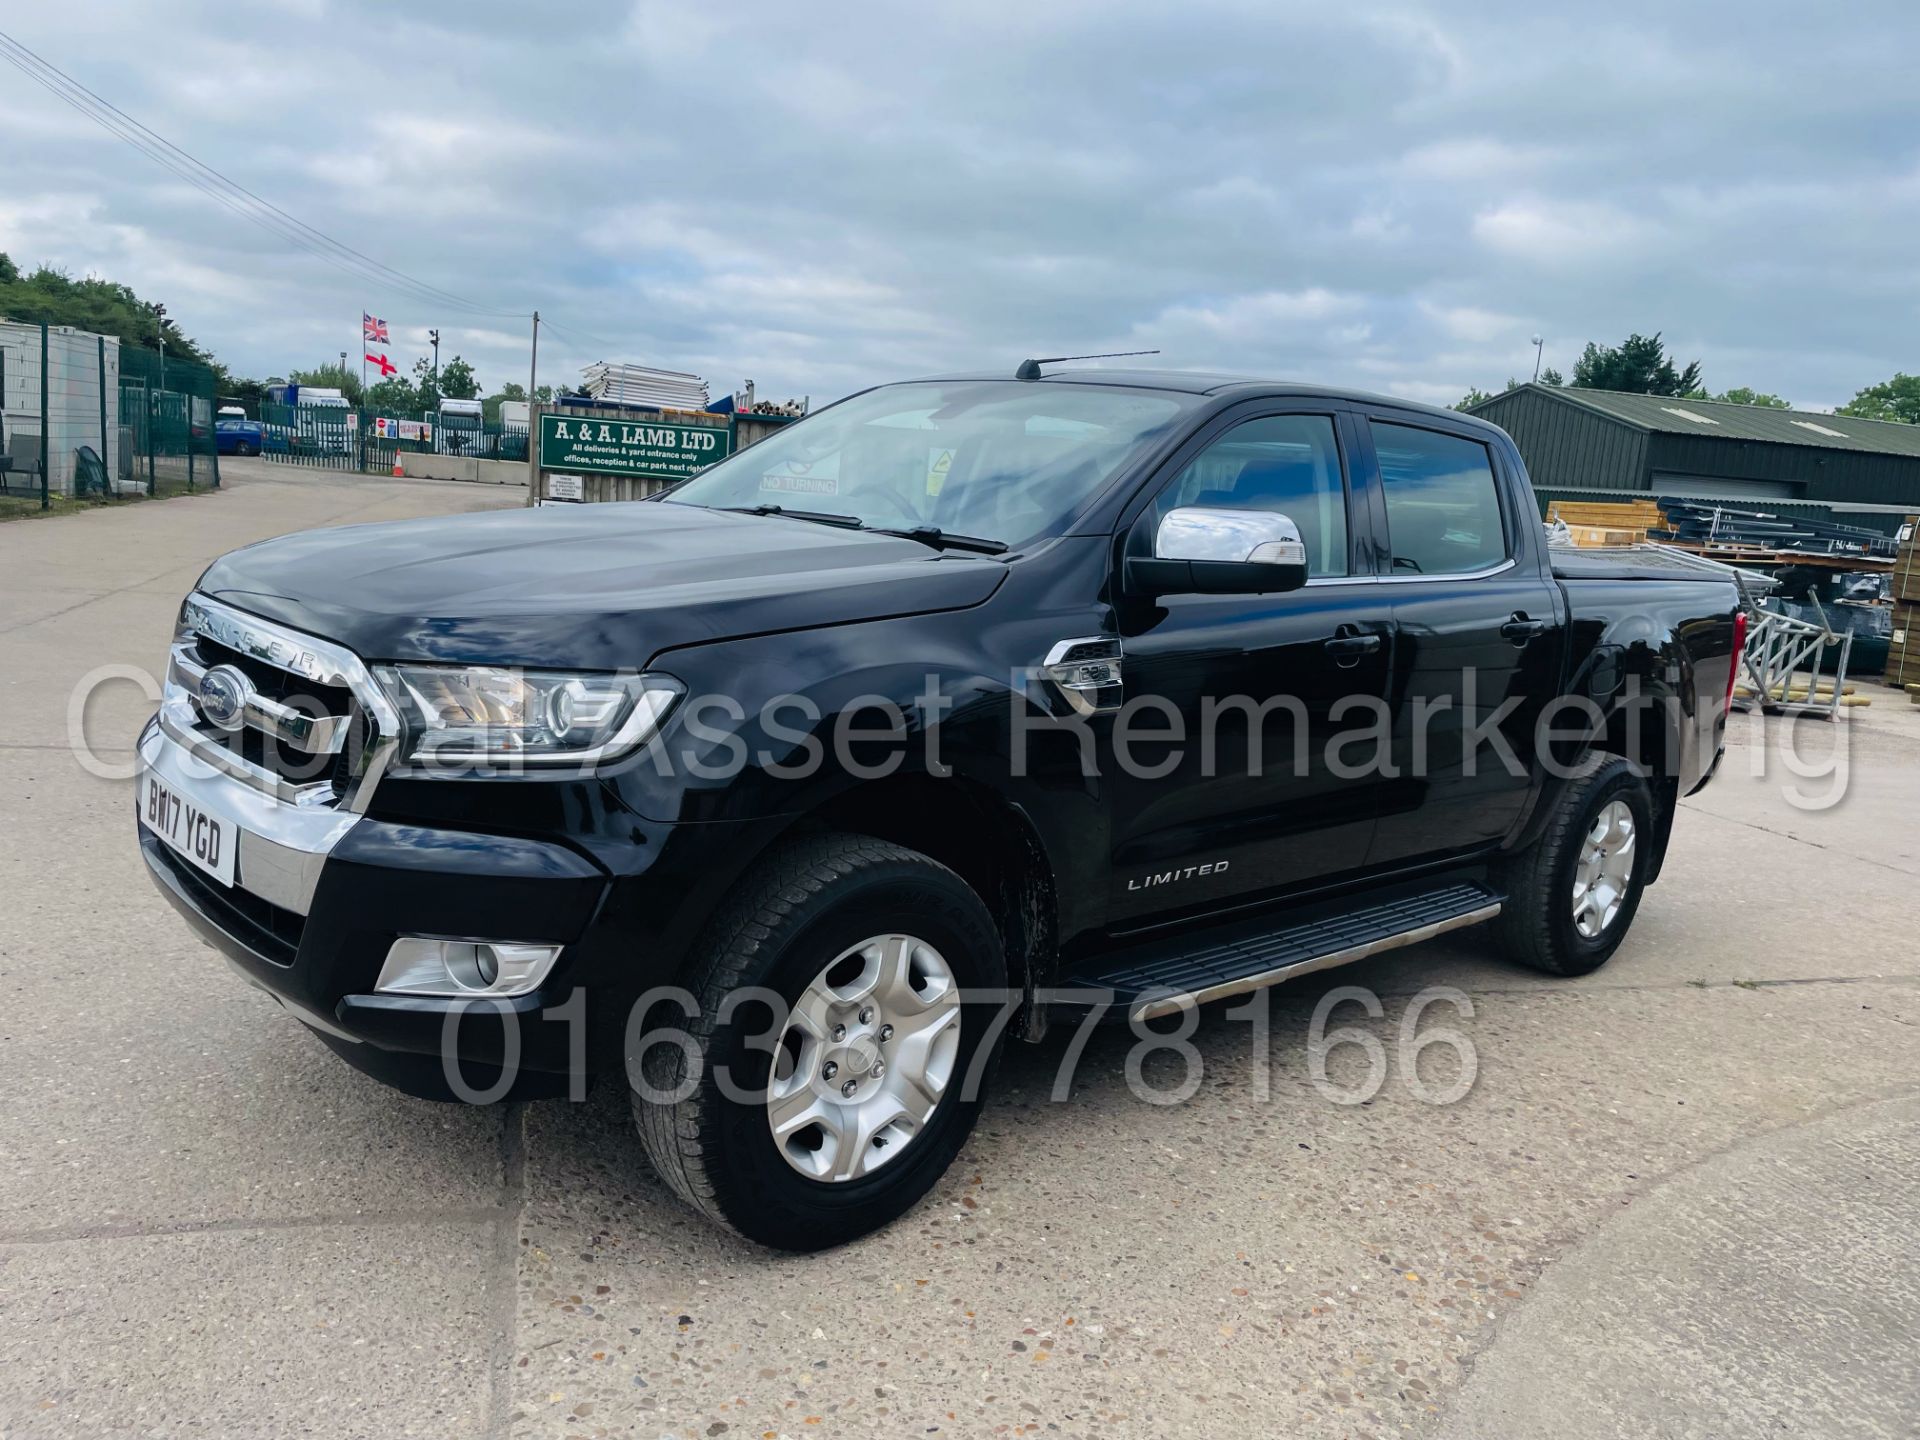 (On Sale) FORD RANGER *LIMITED EDITION* DOUBLE CAB PICK-UP (2017 -EURO 6) 'AUTO - LEATHER' (1 OWNER) - Image 6 of 56